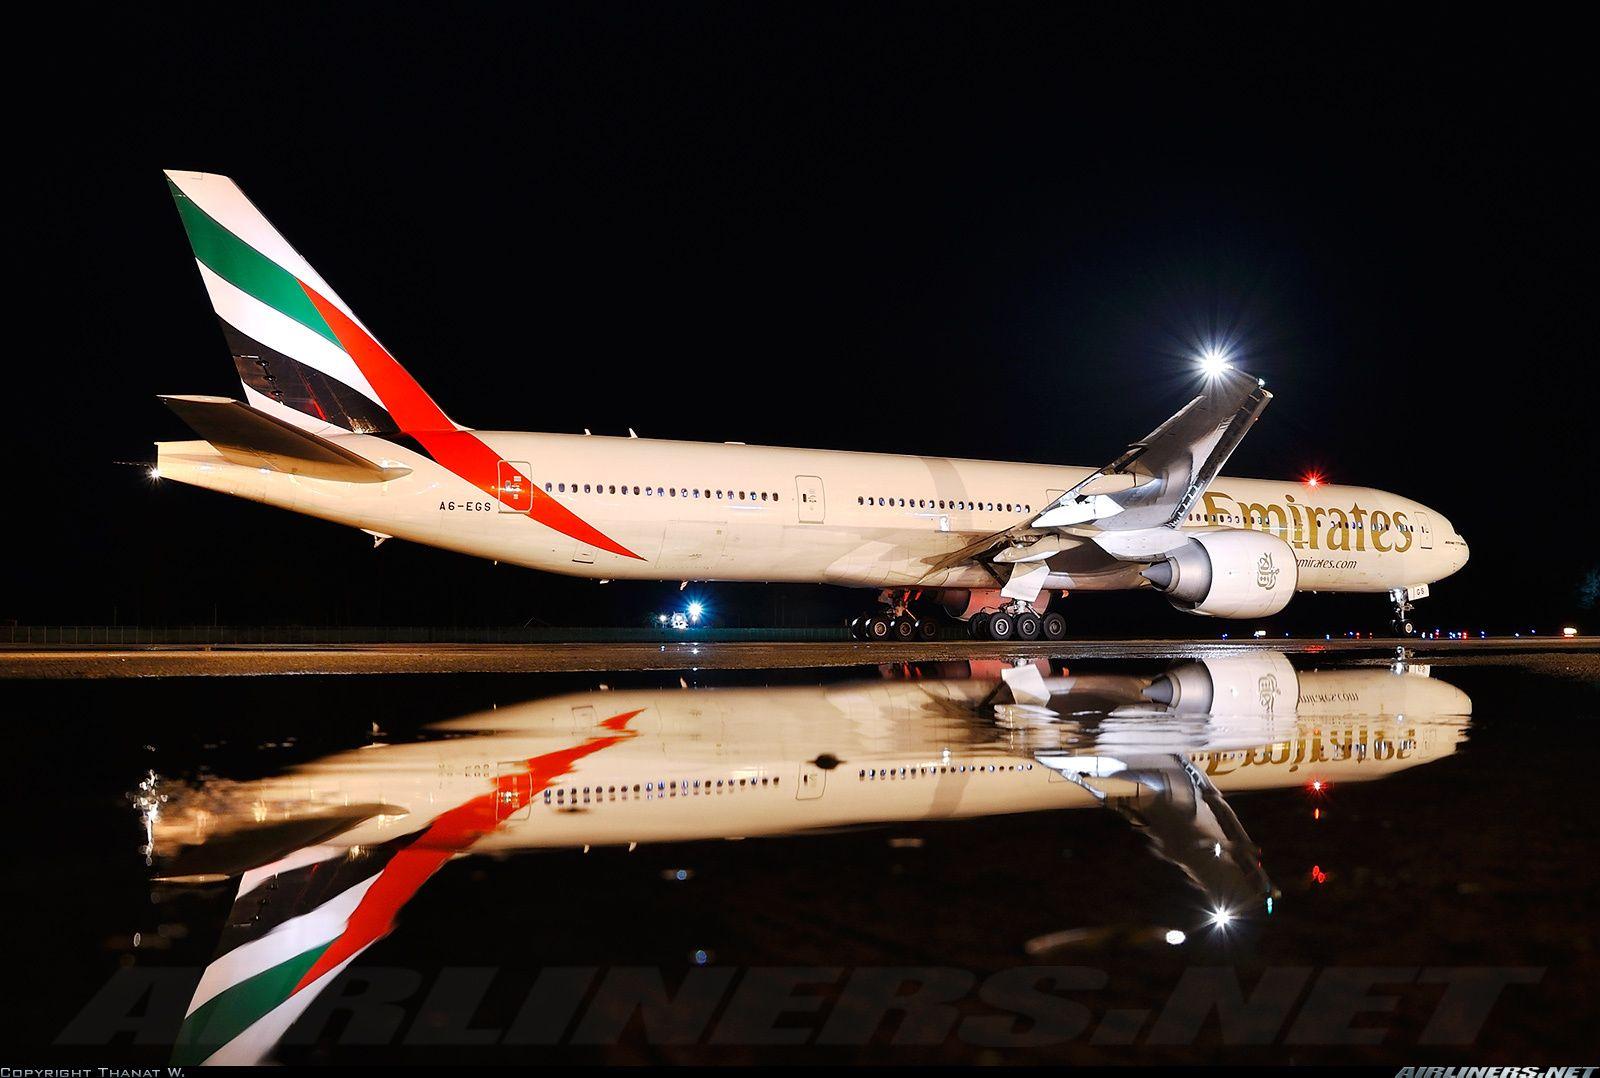 Airliners.net reflection in the water at night of an